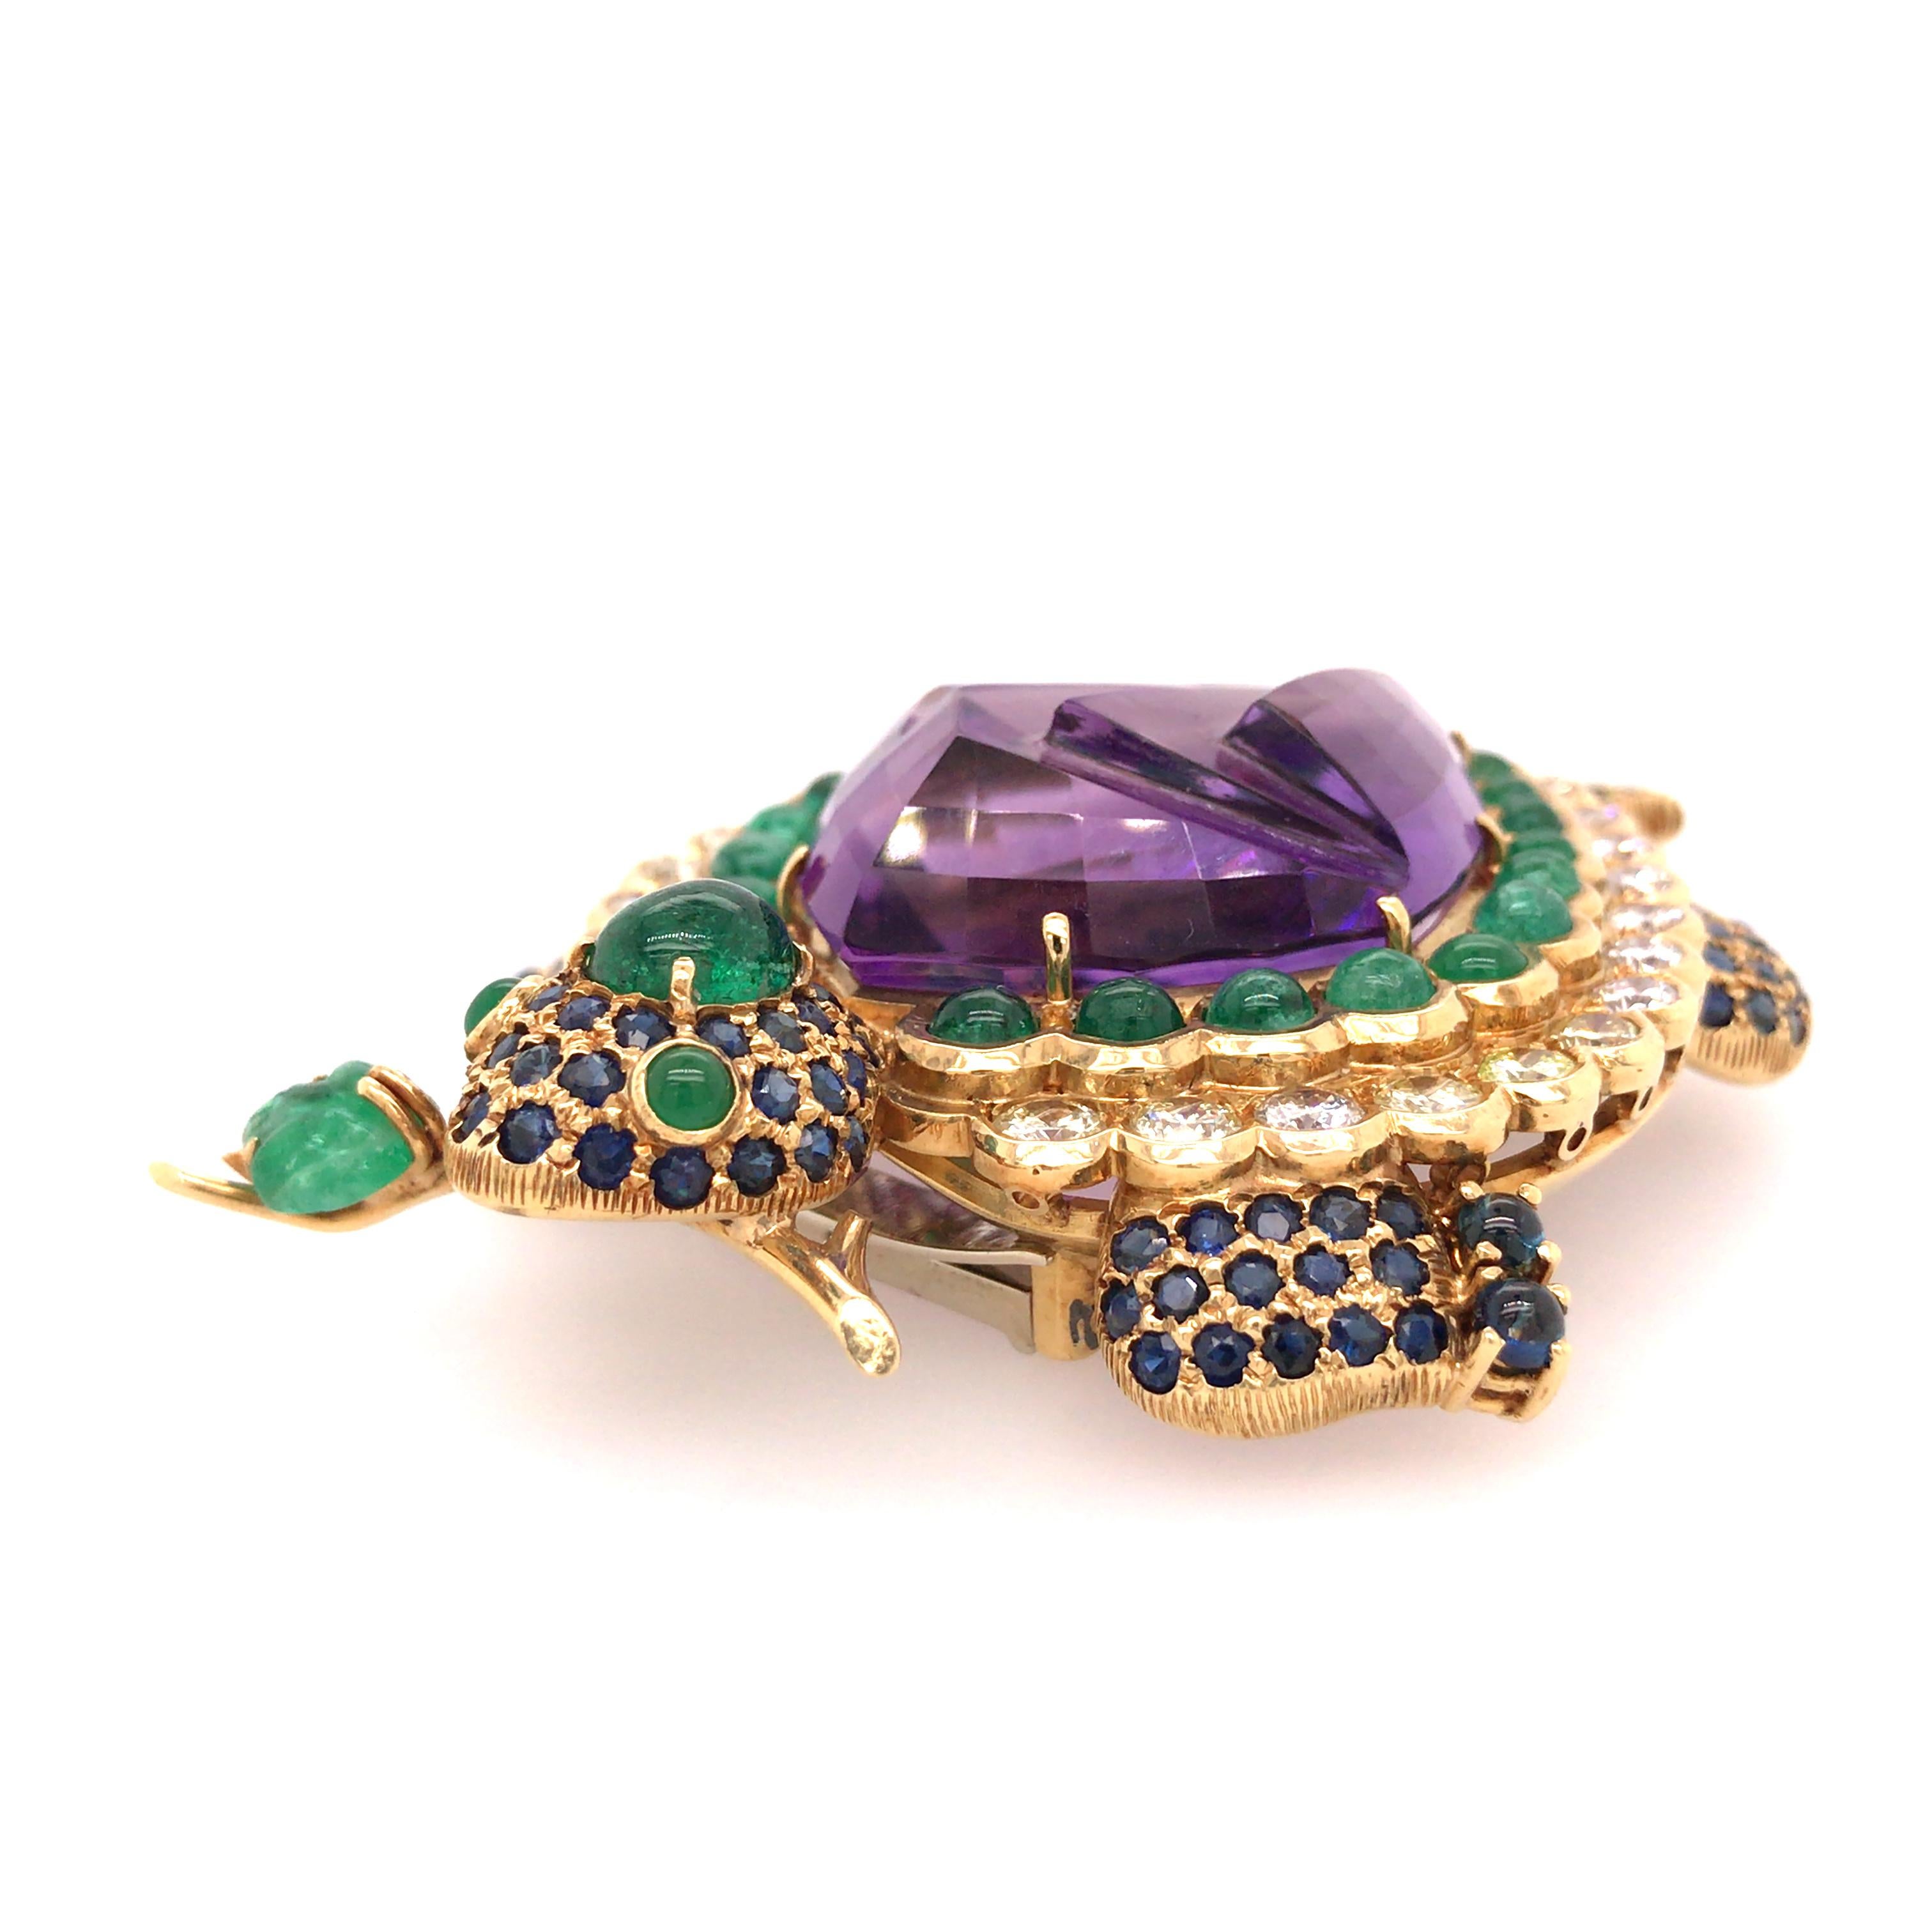 Turtle Pin 15 Carat Amethyst Gemstone Center in 18K Yellow Gold. Round Brilliant Cut Diamonds weighing 3.12 carat total weight, G-H in color and VS in clarity, Sapphires weighing 2.18 carat total weight and Emeralds weighing 6.0 carat total weight